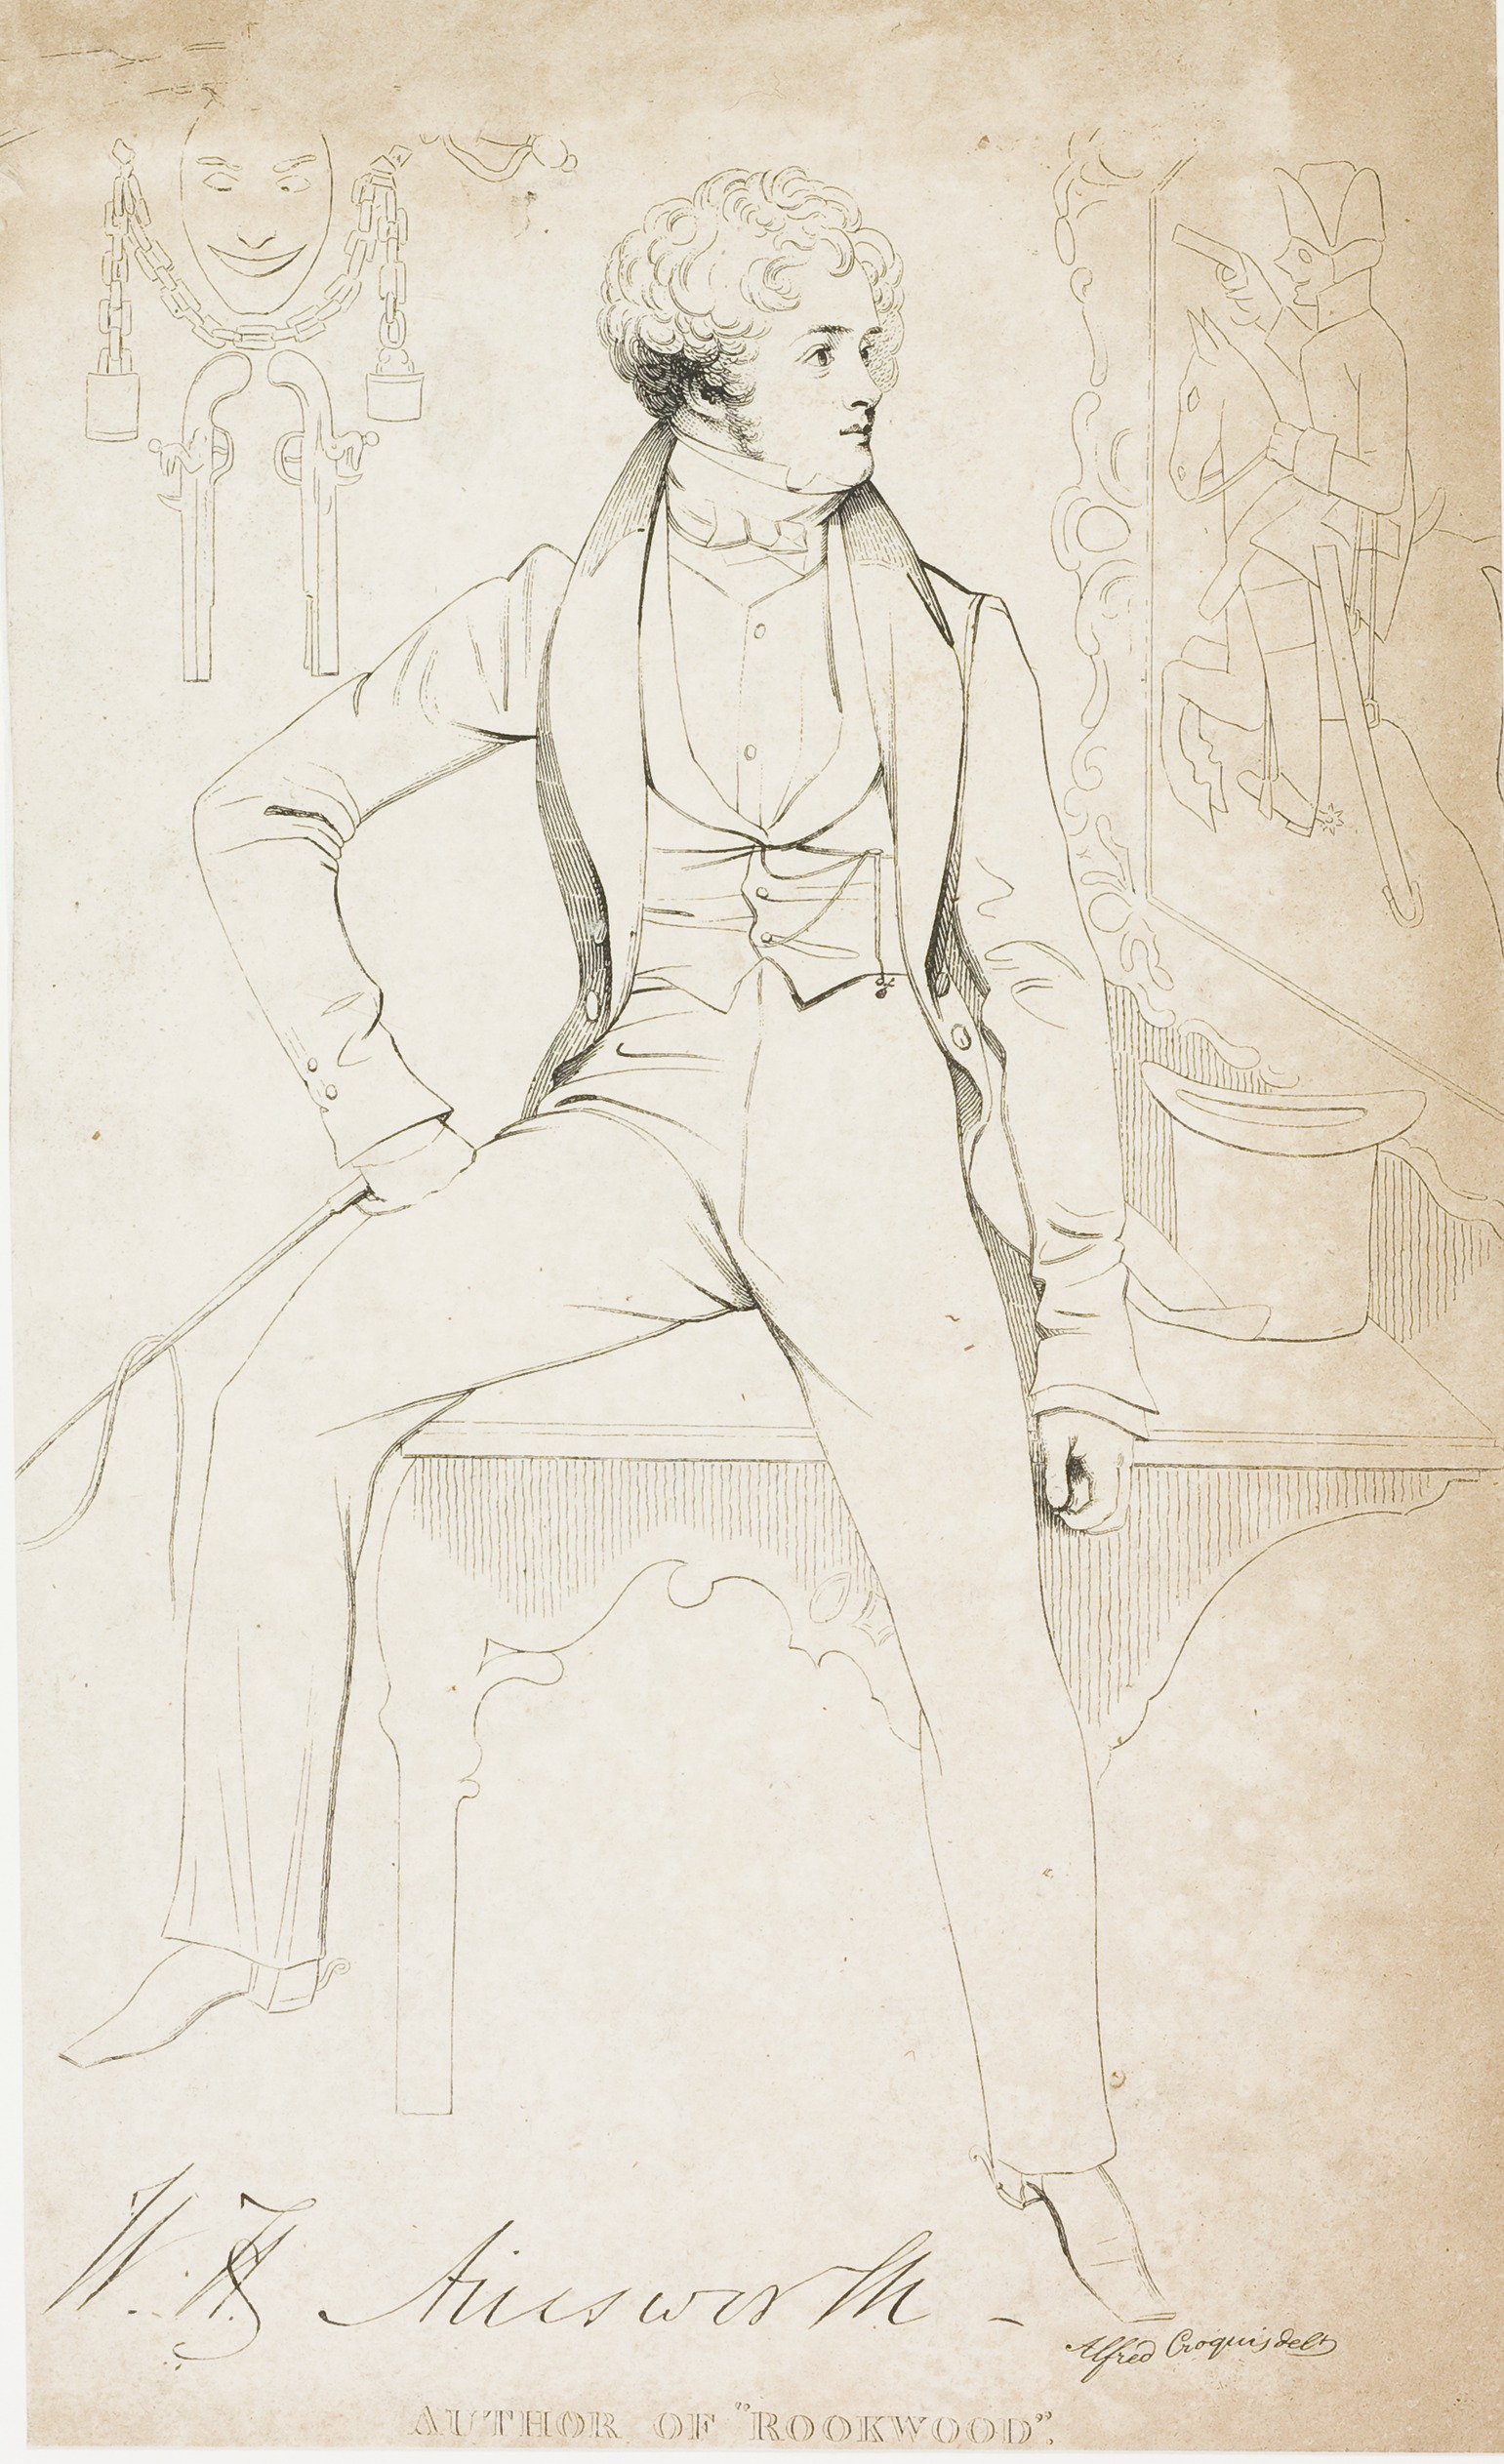 William Harrison Ainsworth, author of The Tower of London (1840), by Alfred Croquis, c. 1834. Katholieke Universiteit Leuven (Public Domain).